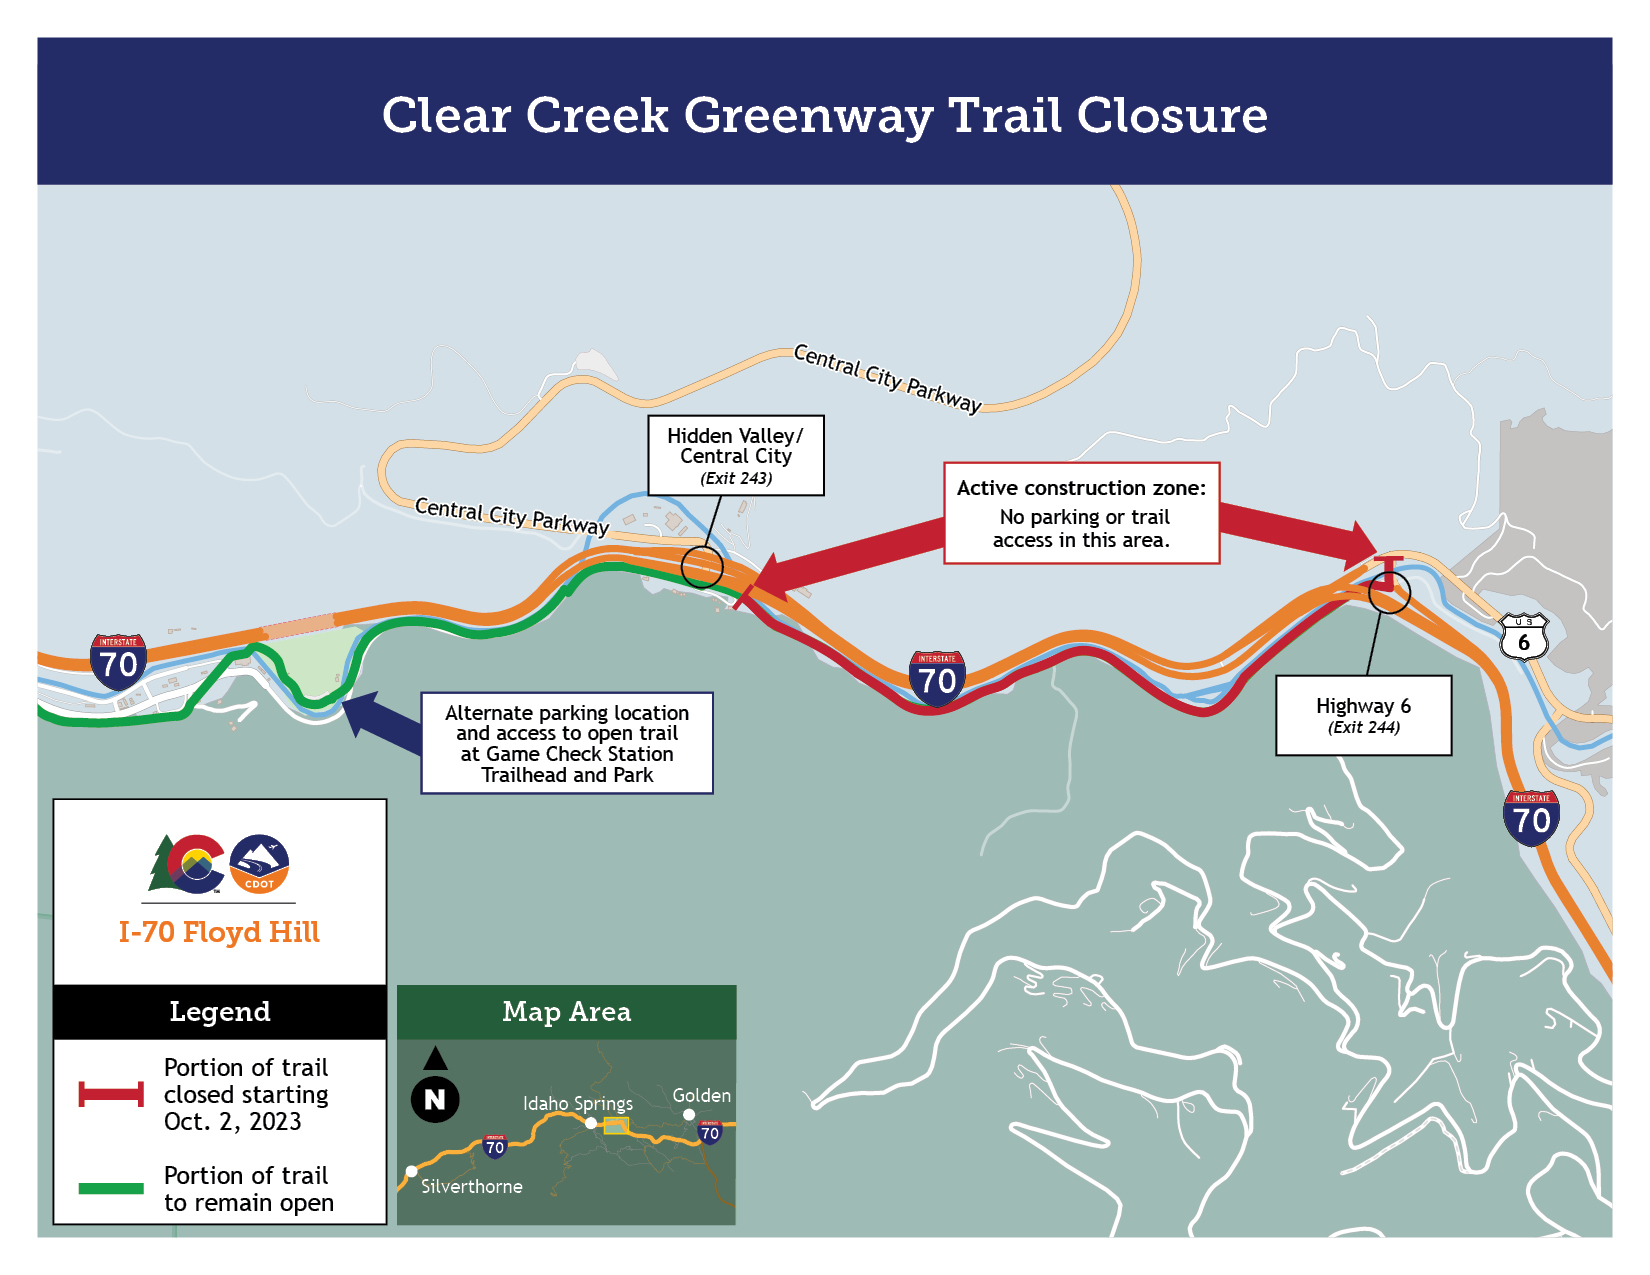 Clear Creek Greenway Trail closed between US 6 and Hidden Valley interchanges. Alternate parking location and access to open trail at Game Check Station Trailhead and Park. detail image